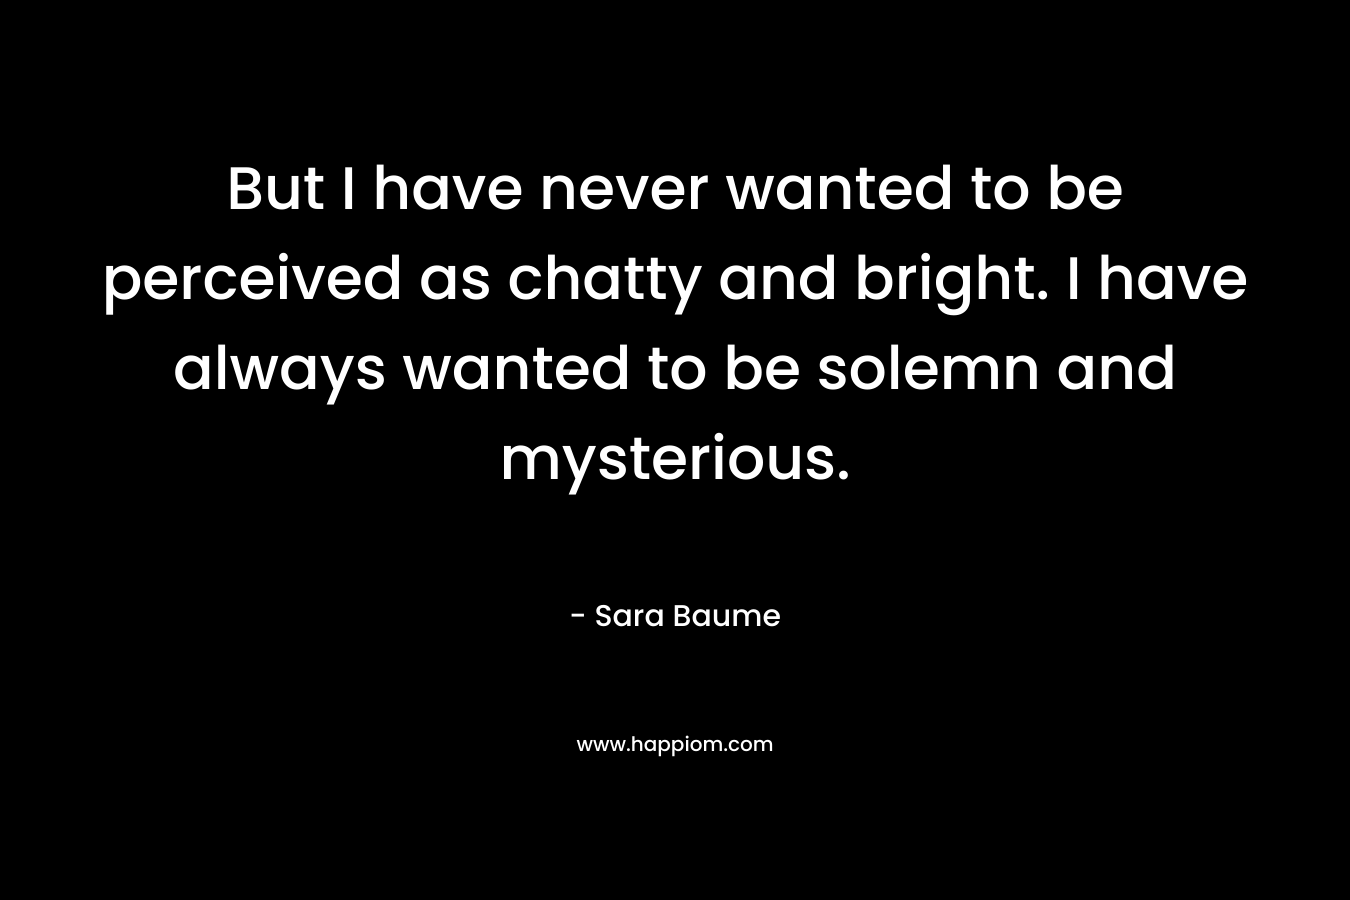 But I have never wanted to be perceived as chatty and bright. I have always wanted to be solemn and mysterious.